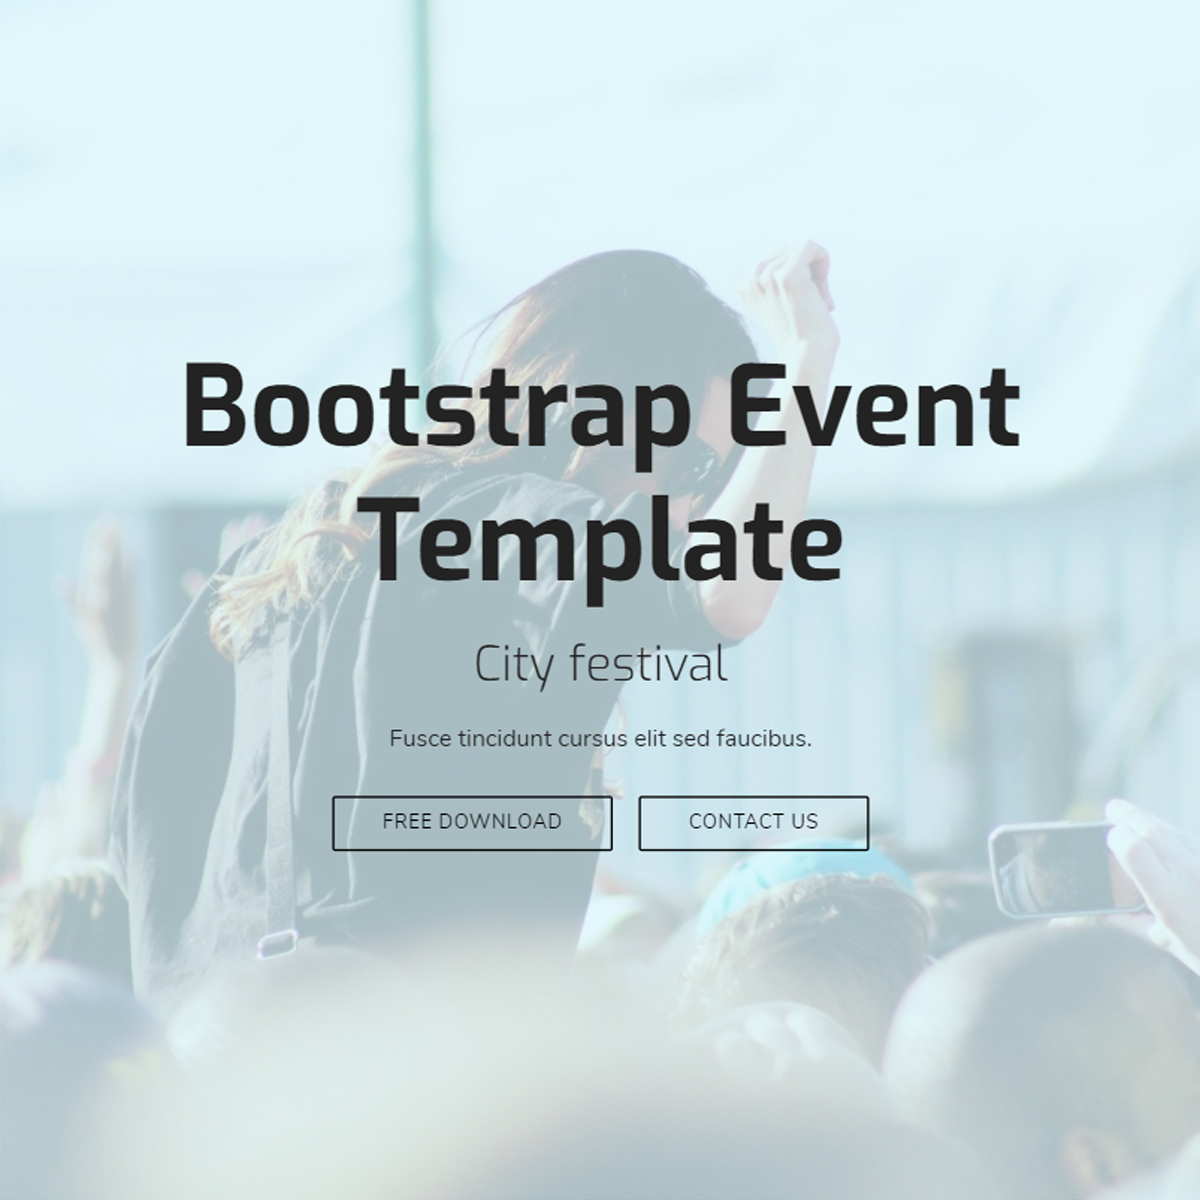 Free Download Bootstrap Event Templates